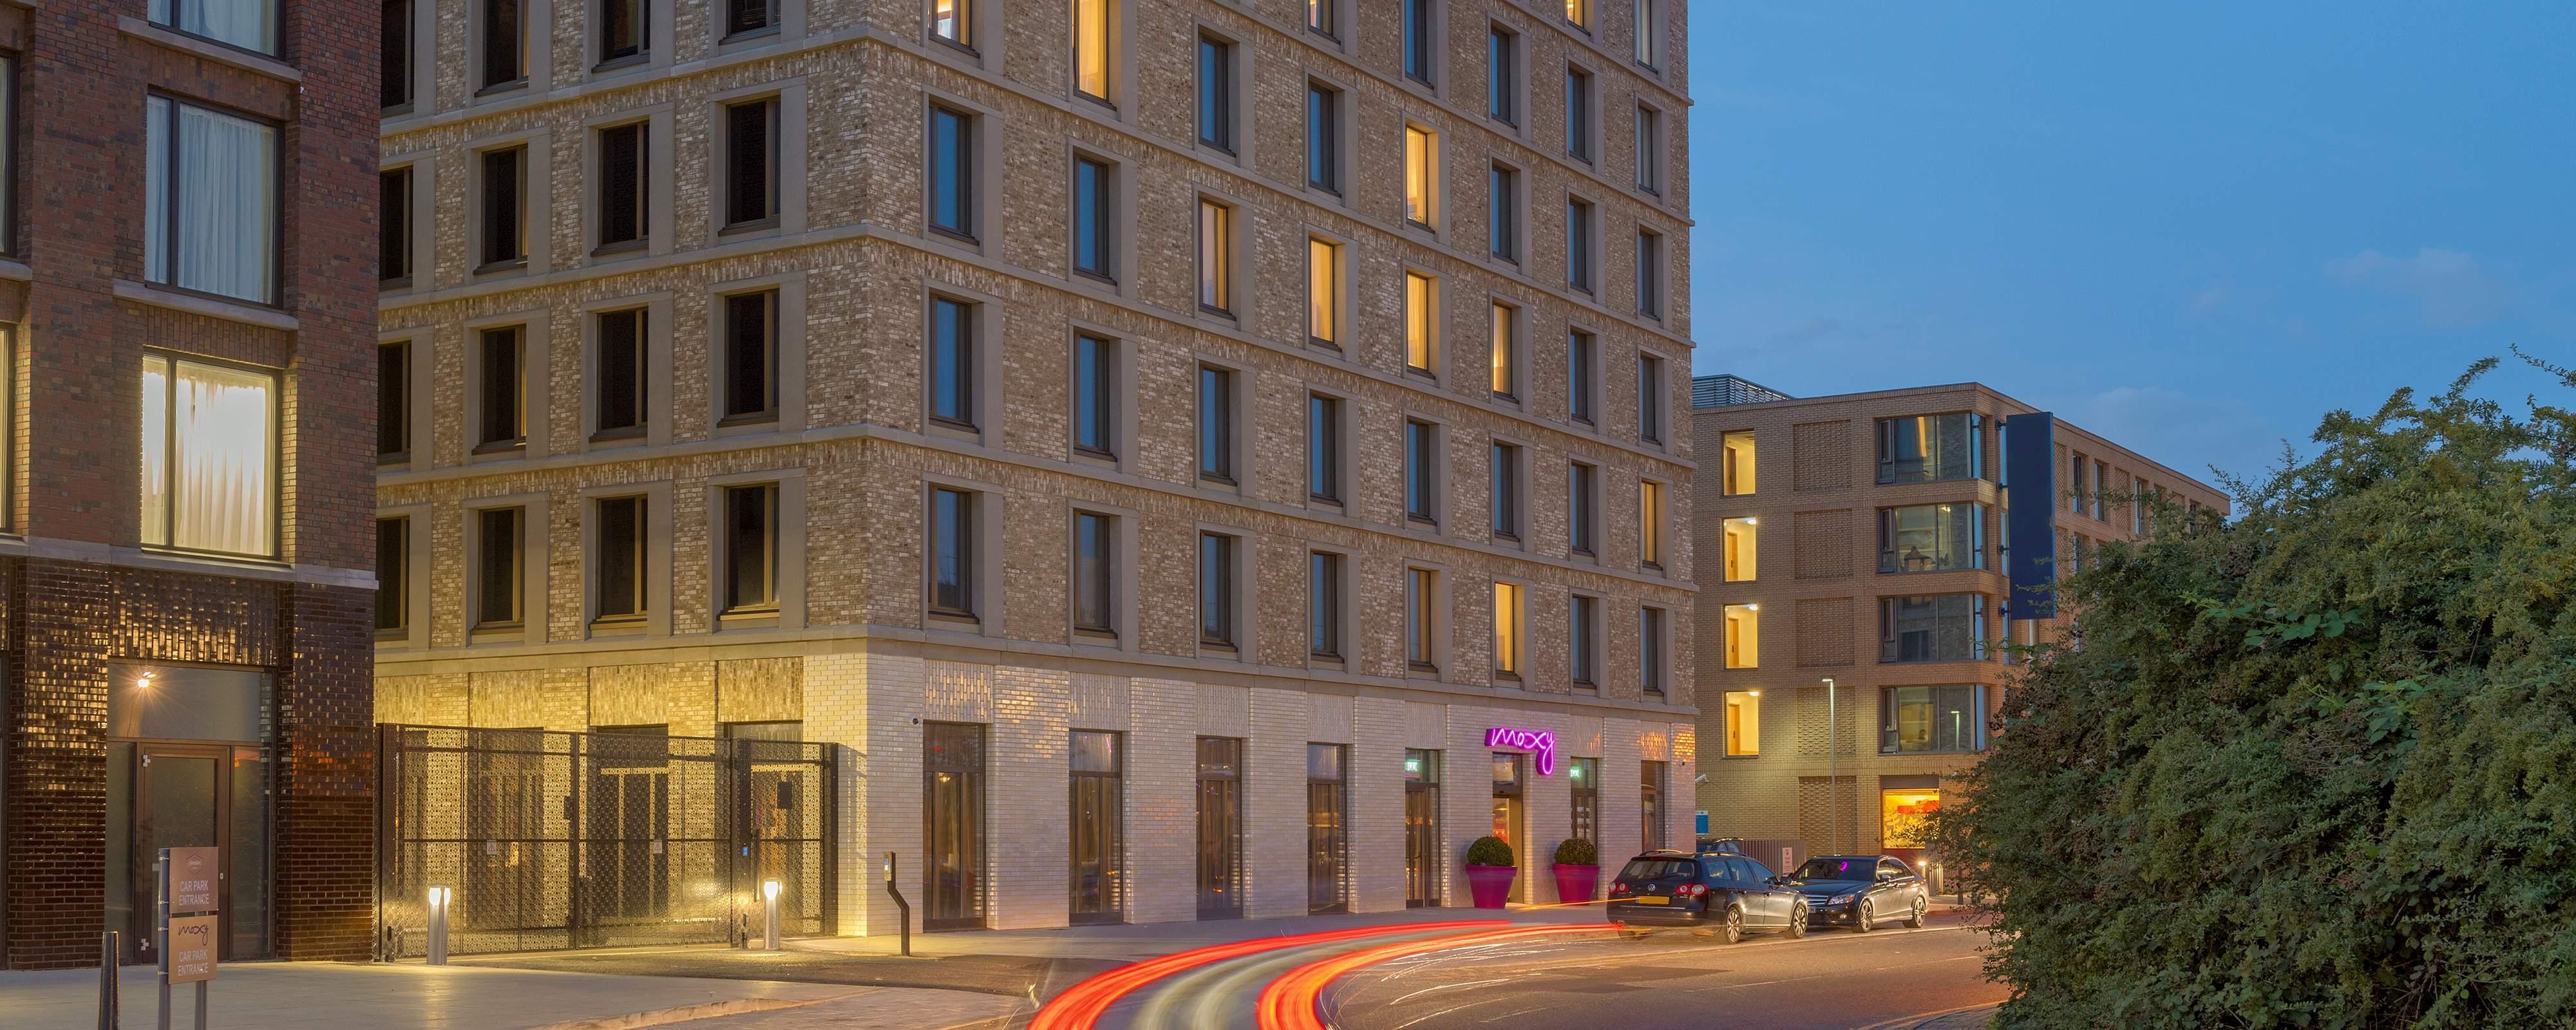 Image for Moxy London Excel, a Marriott hotel.